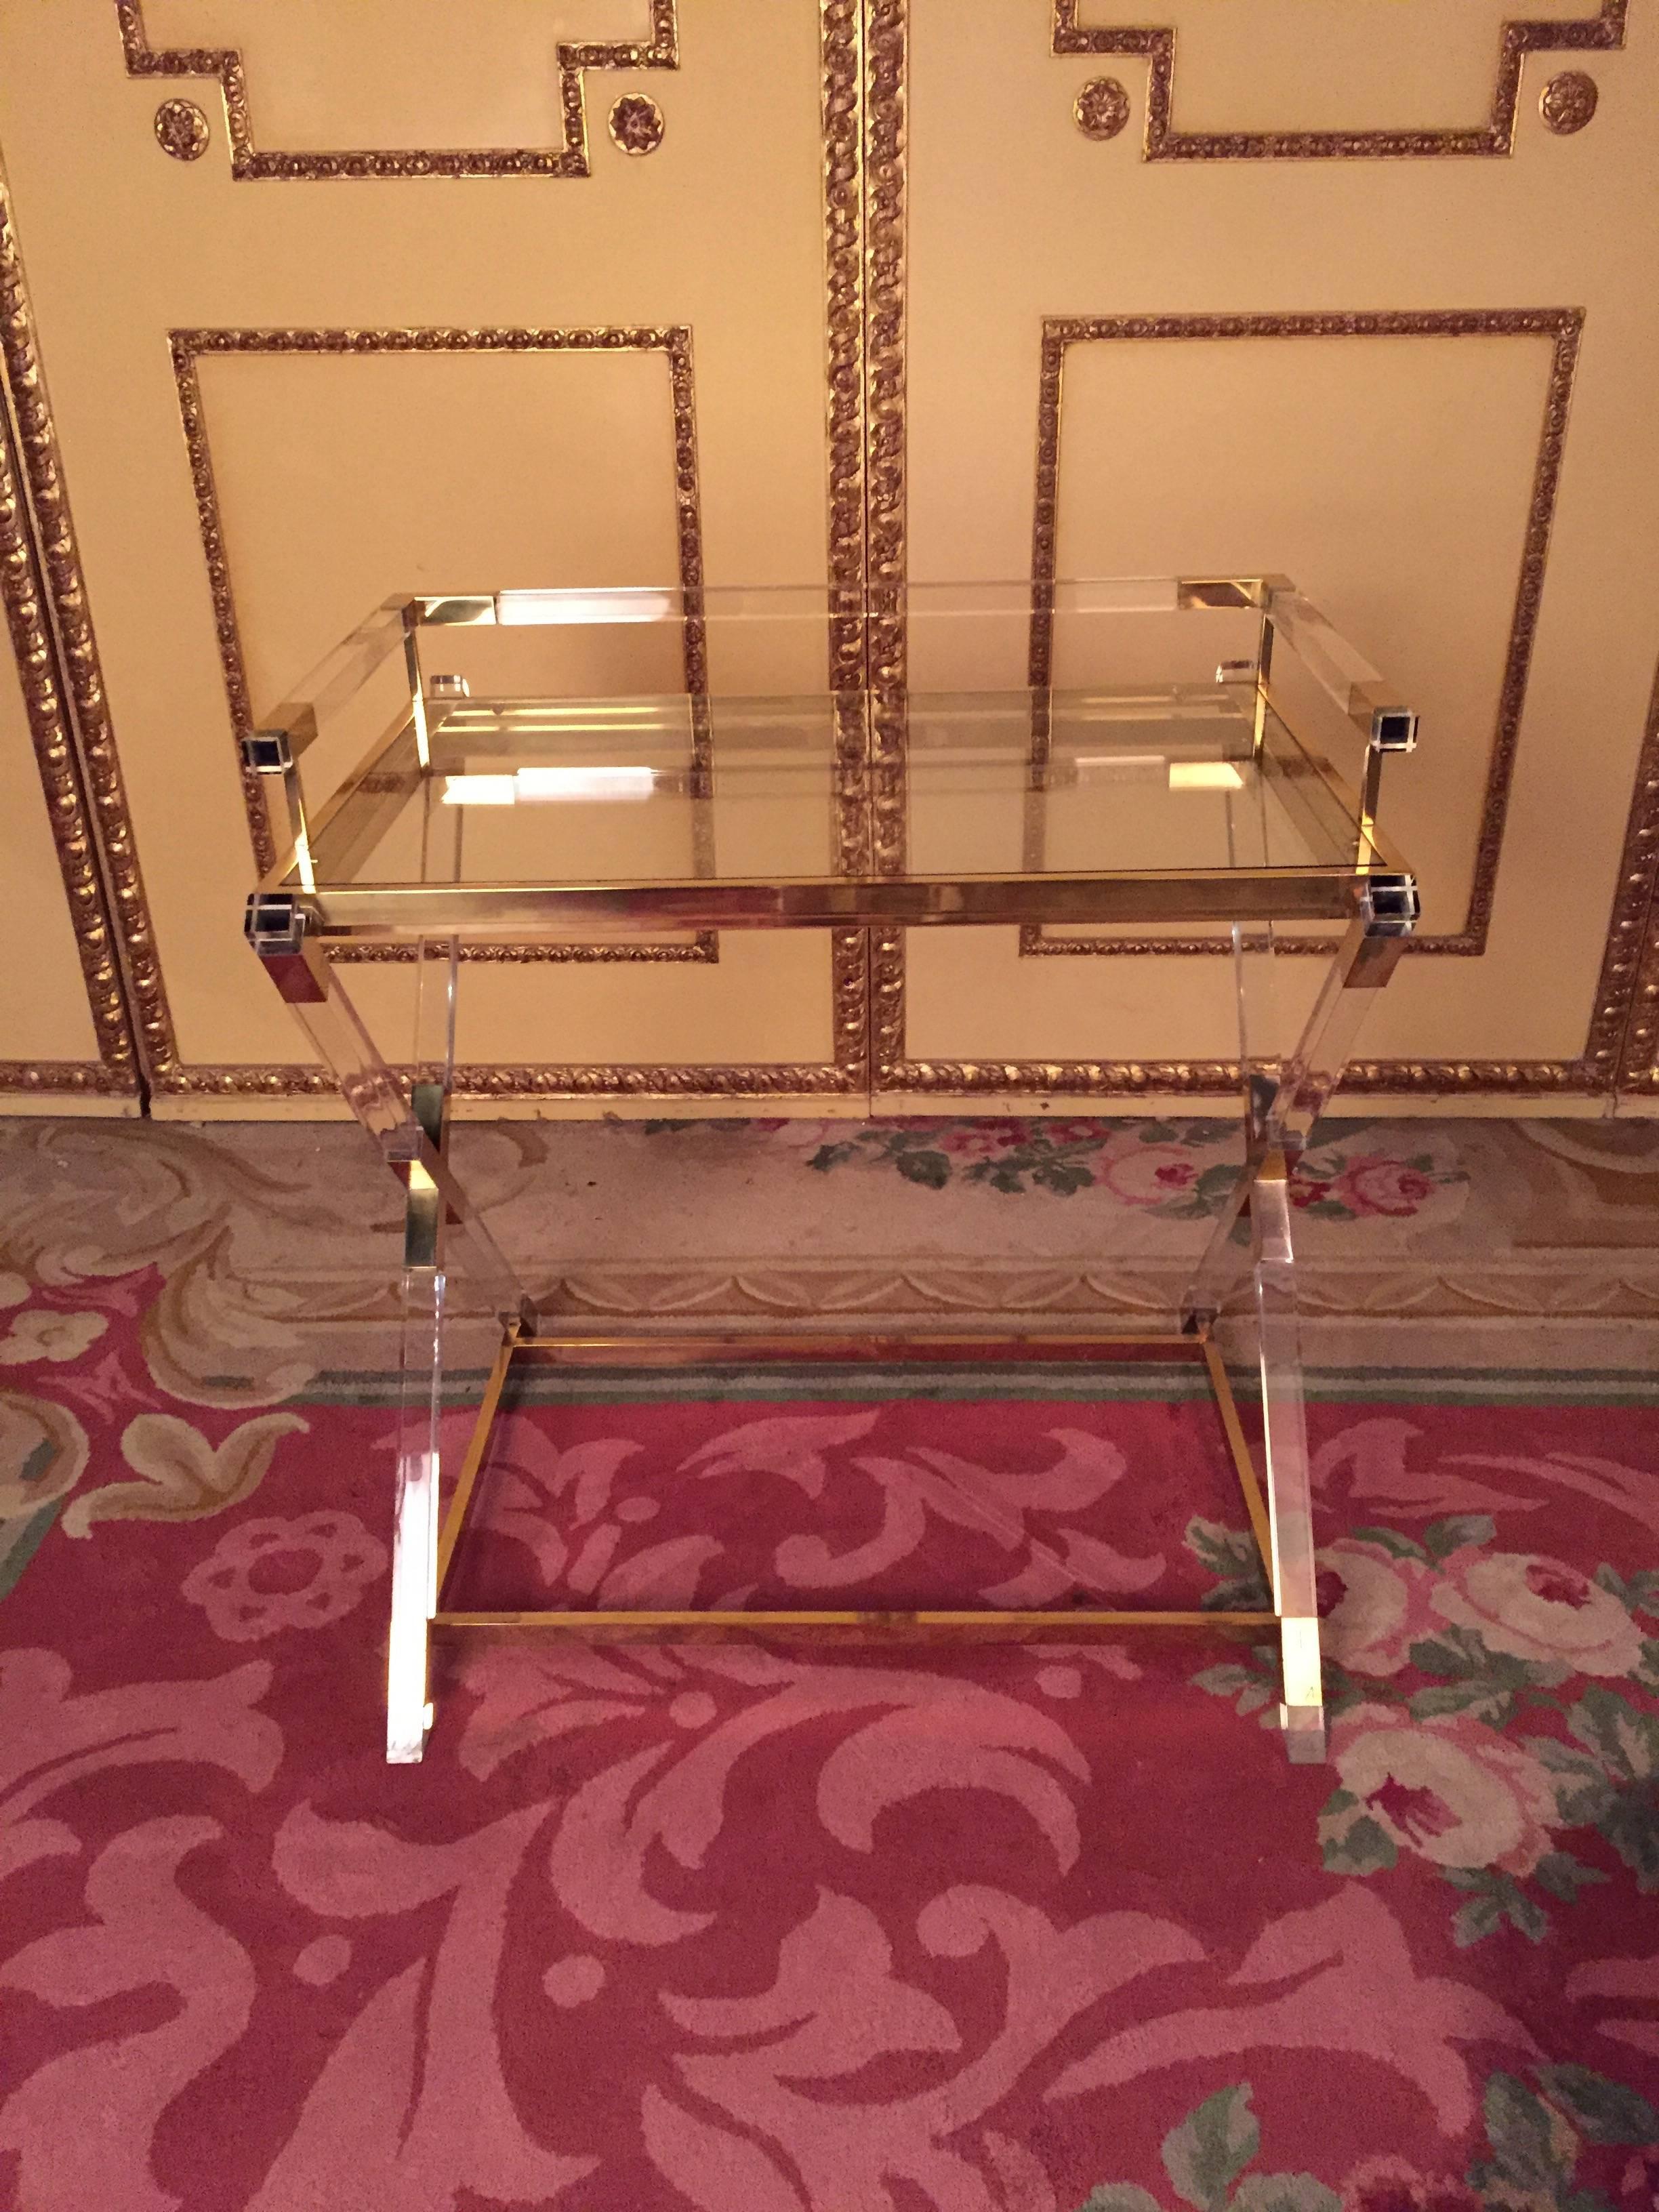 Extremely high-quality serving table with removable plate and can therefore be used as a tray.
Criss-cross Style
Partial body with gilded brass fittings.
An absolute eye-catcher.